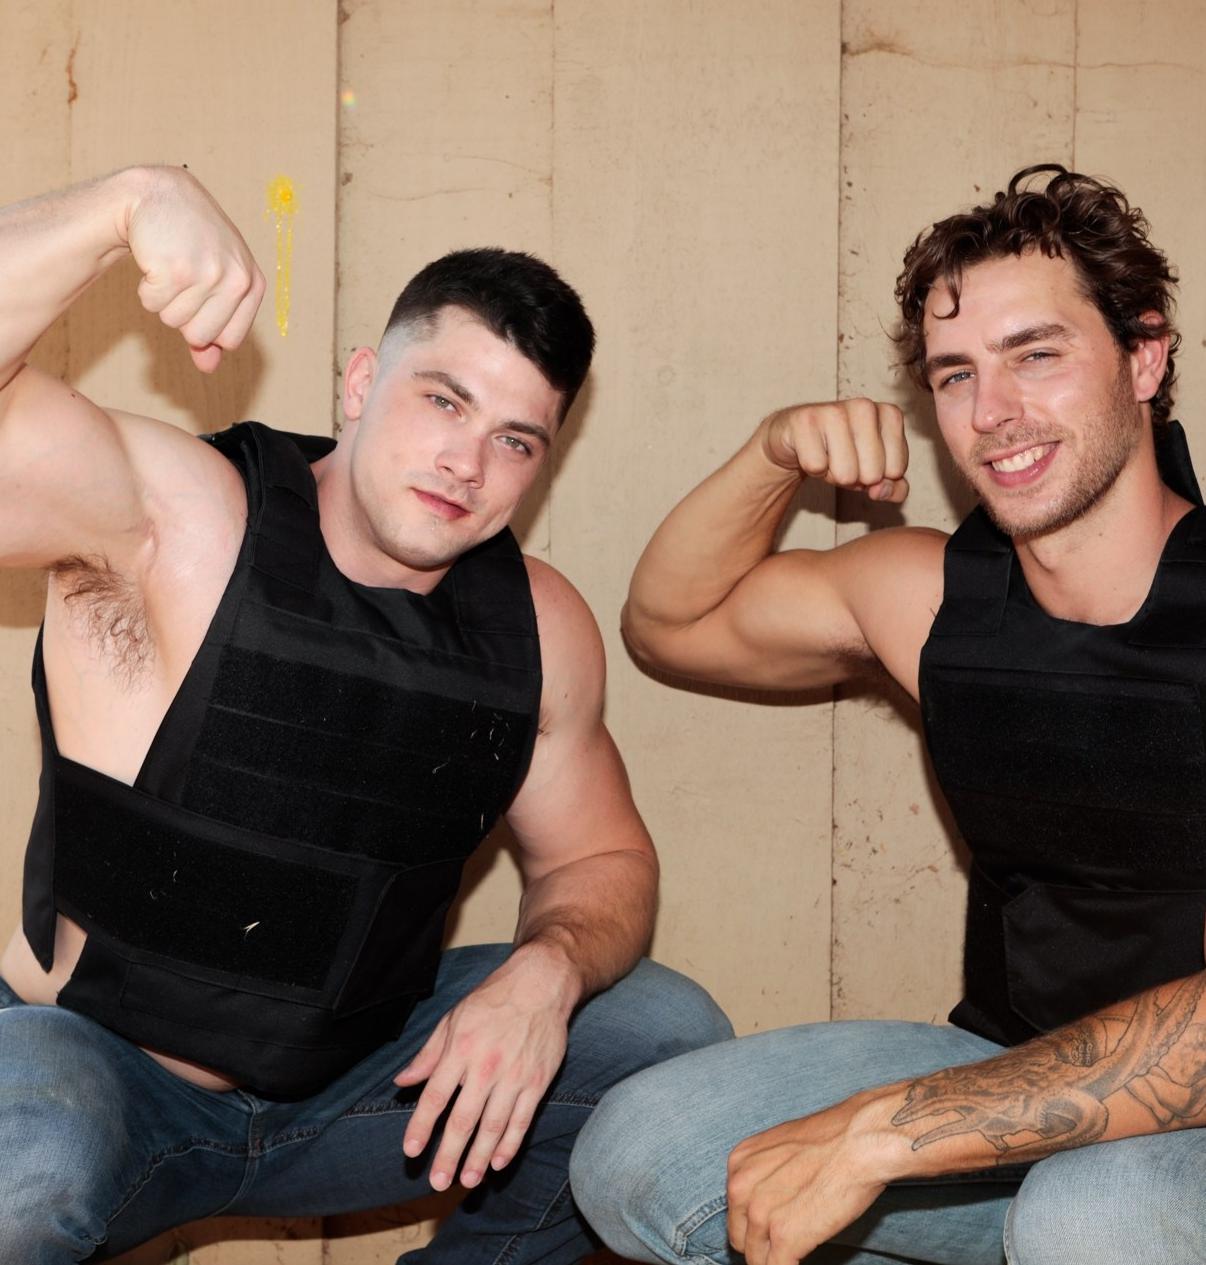 Two horny & muscle bound buddies blow their loads | Daily Dudes @ Dude Dump